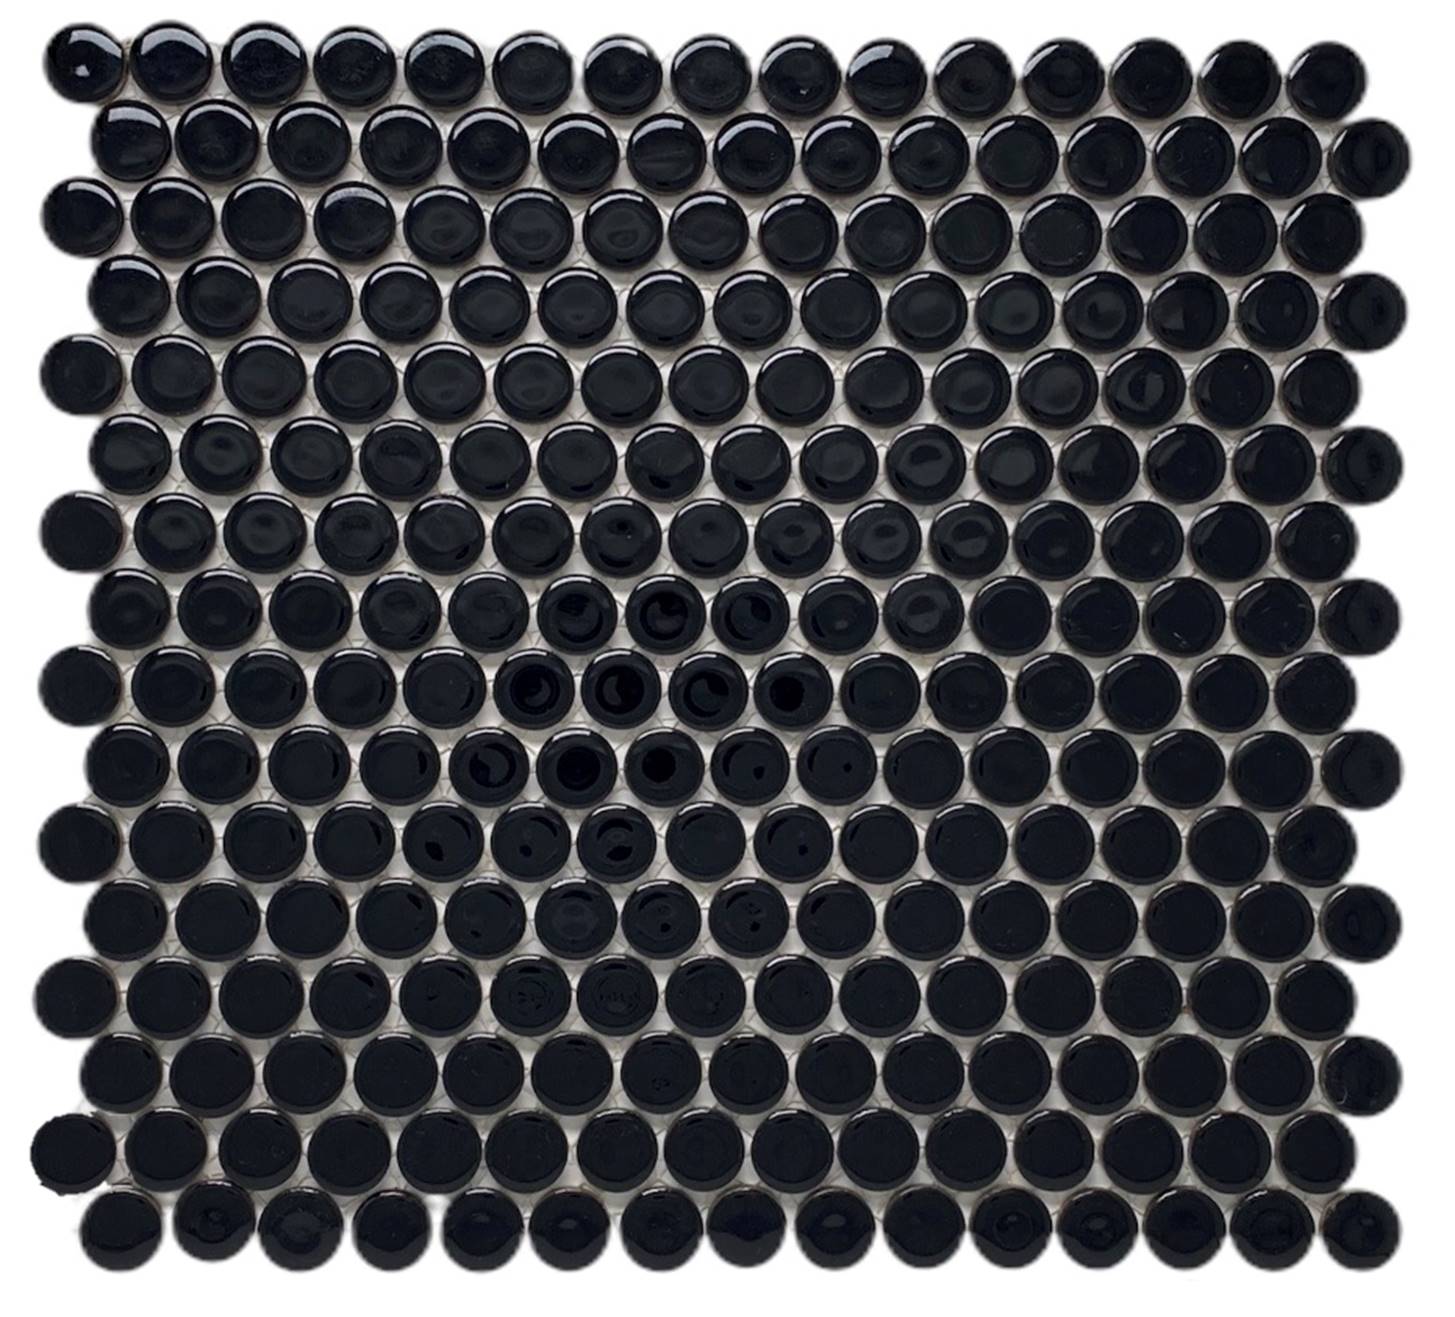 Penny Round Tile Black Porcelain Mosaic Shiny Look (Box of 5.1 Sq Ft)